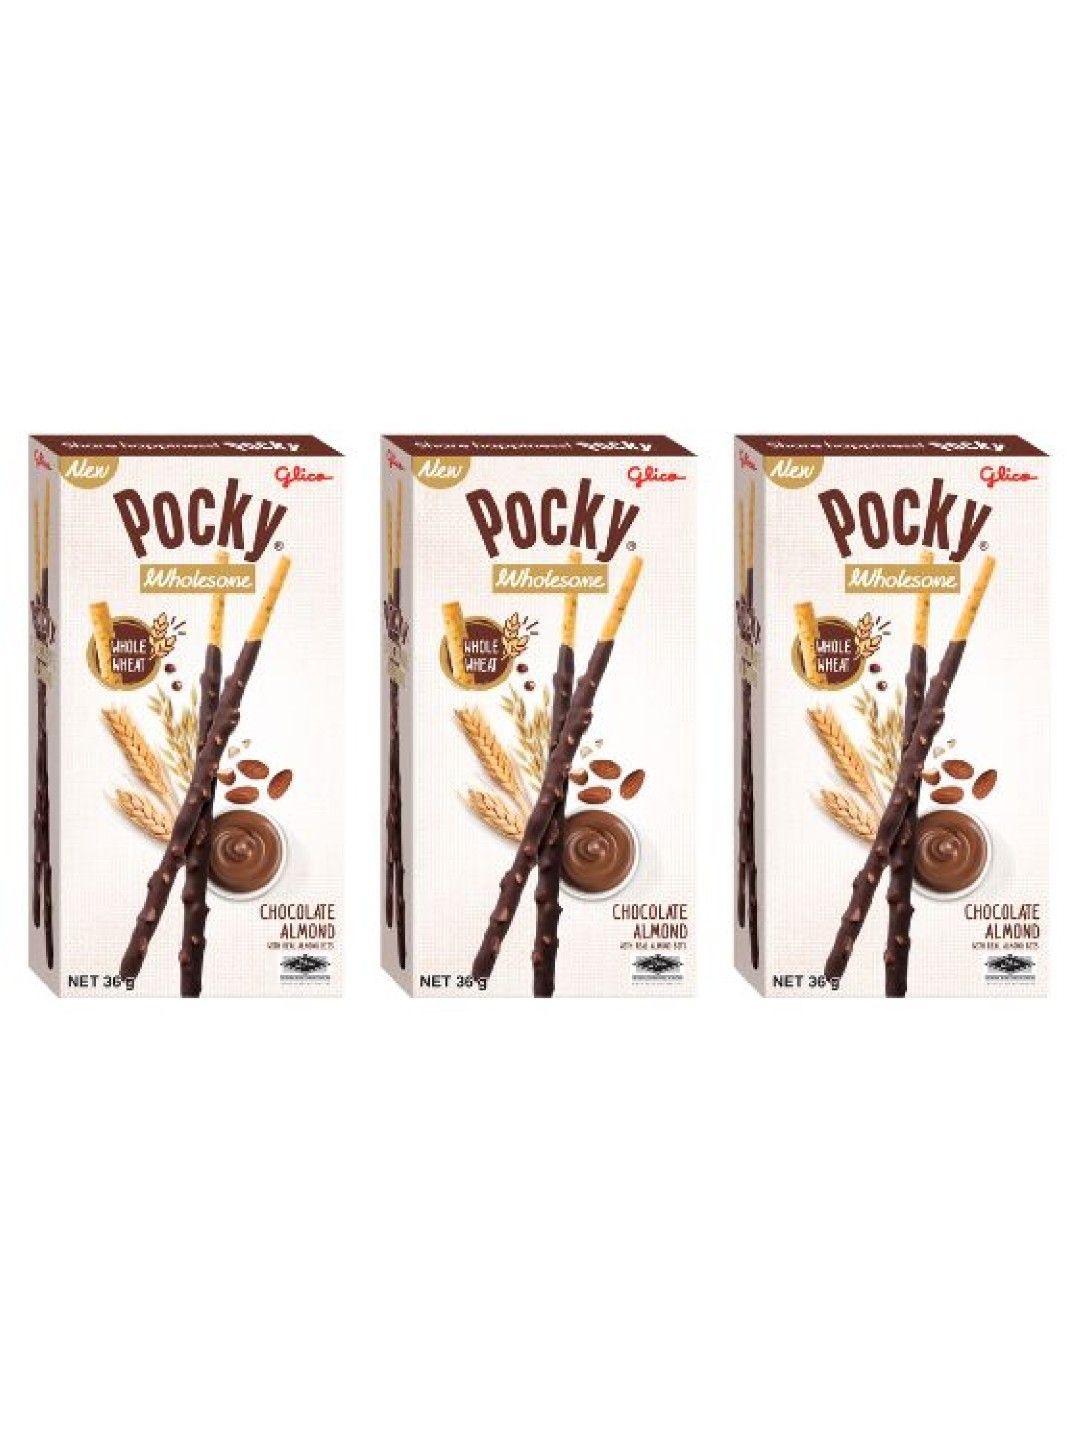 Pocky Wholesome Chocolate Almonds Biscuit Sticks (Bundle of 3) (No Color- Image 1)